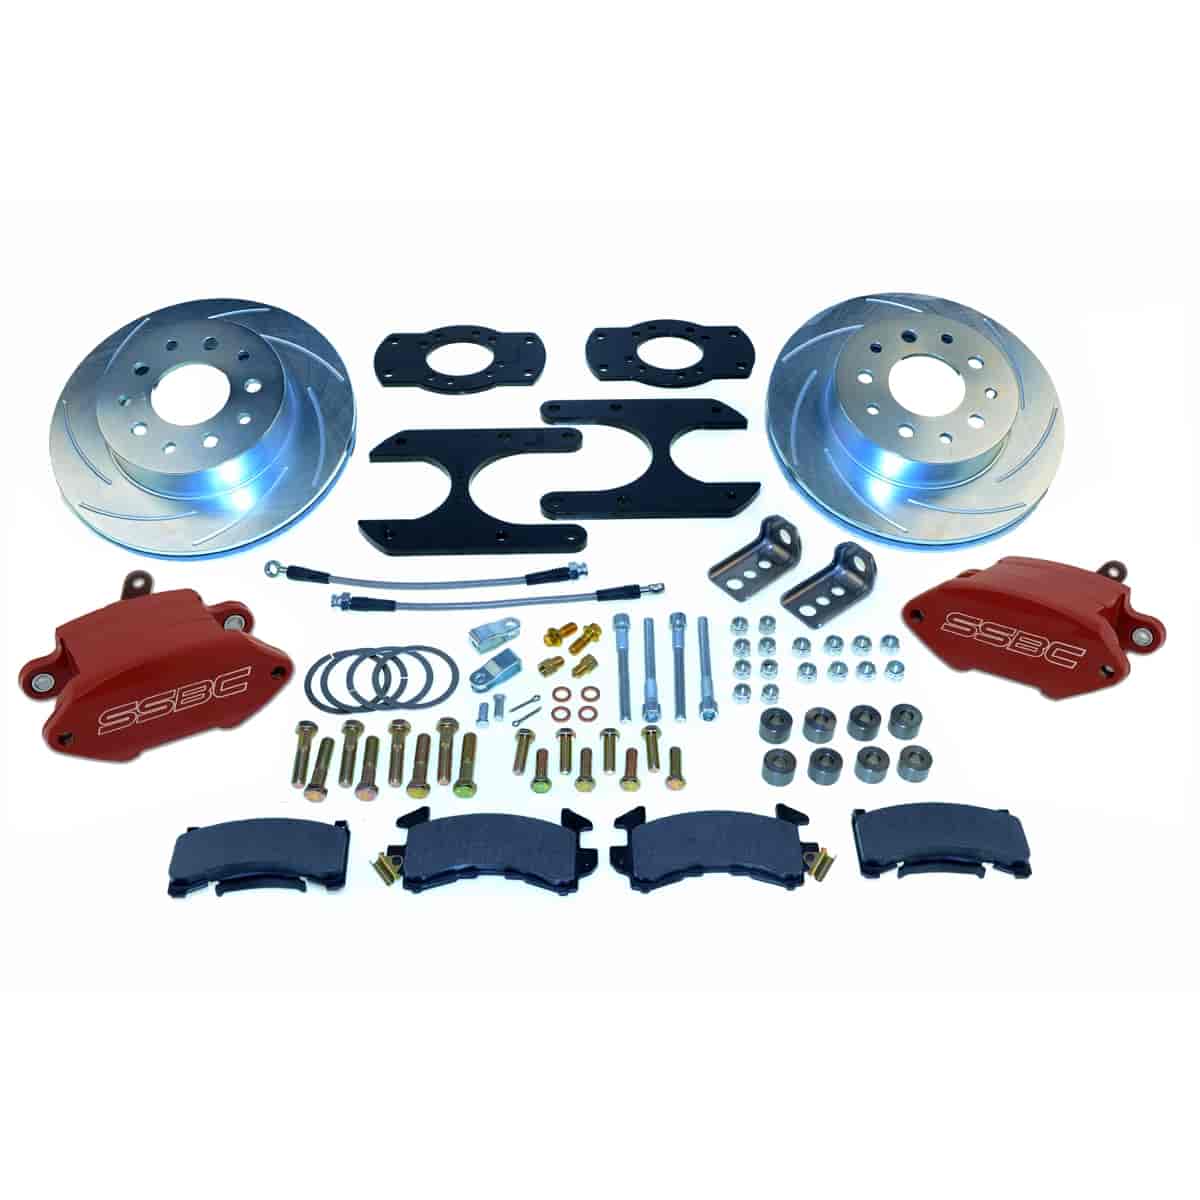 Sport R1 Rear Disc Brake Conversion Kit For GM 10- & 12-Bolt Rear Ends with